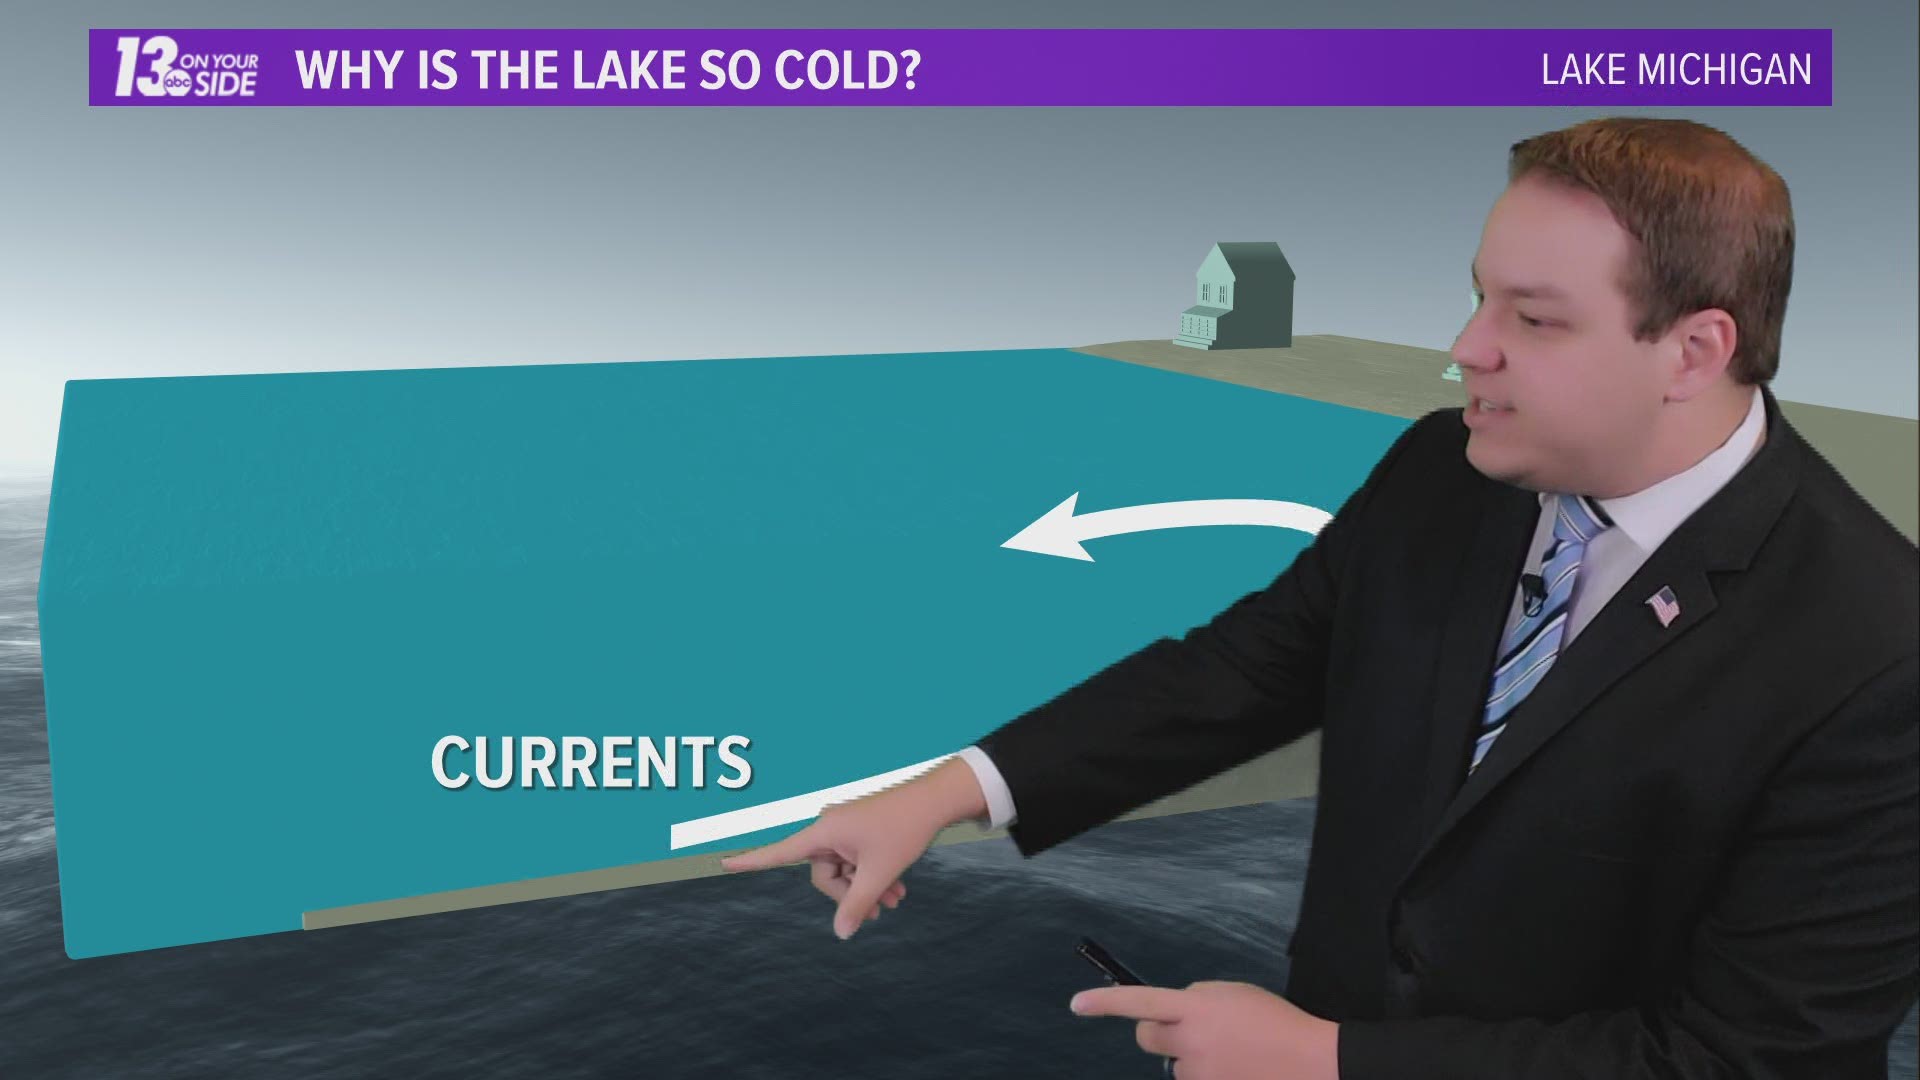 It's the middle of summer, but Lake Michigan has turned cold, even dangerously so this week. Meteorologist Michael Behrens explains why.